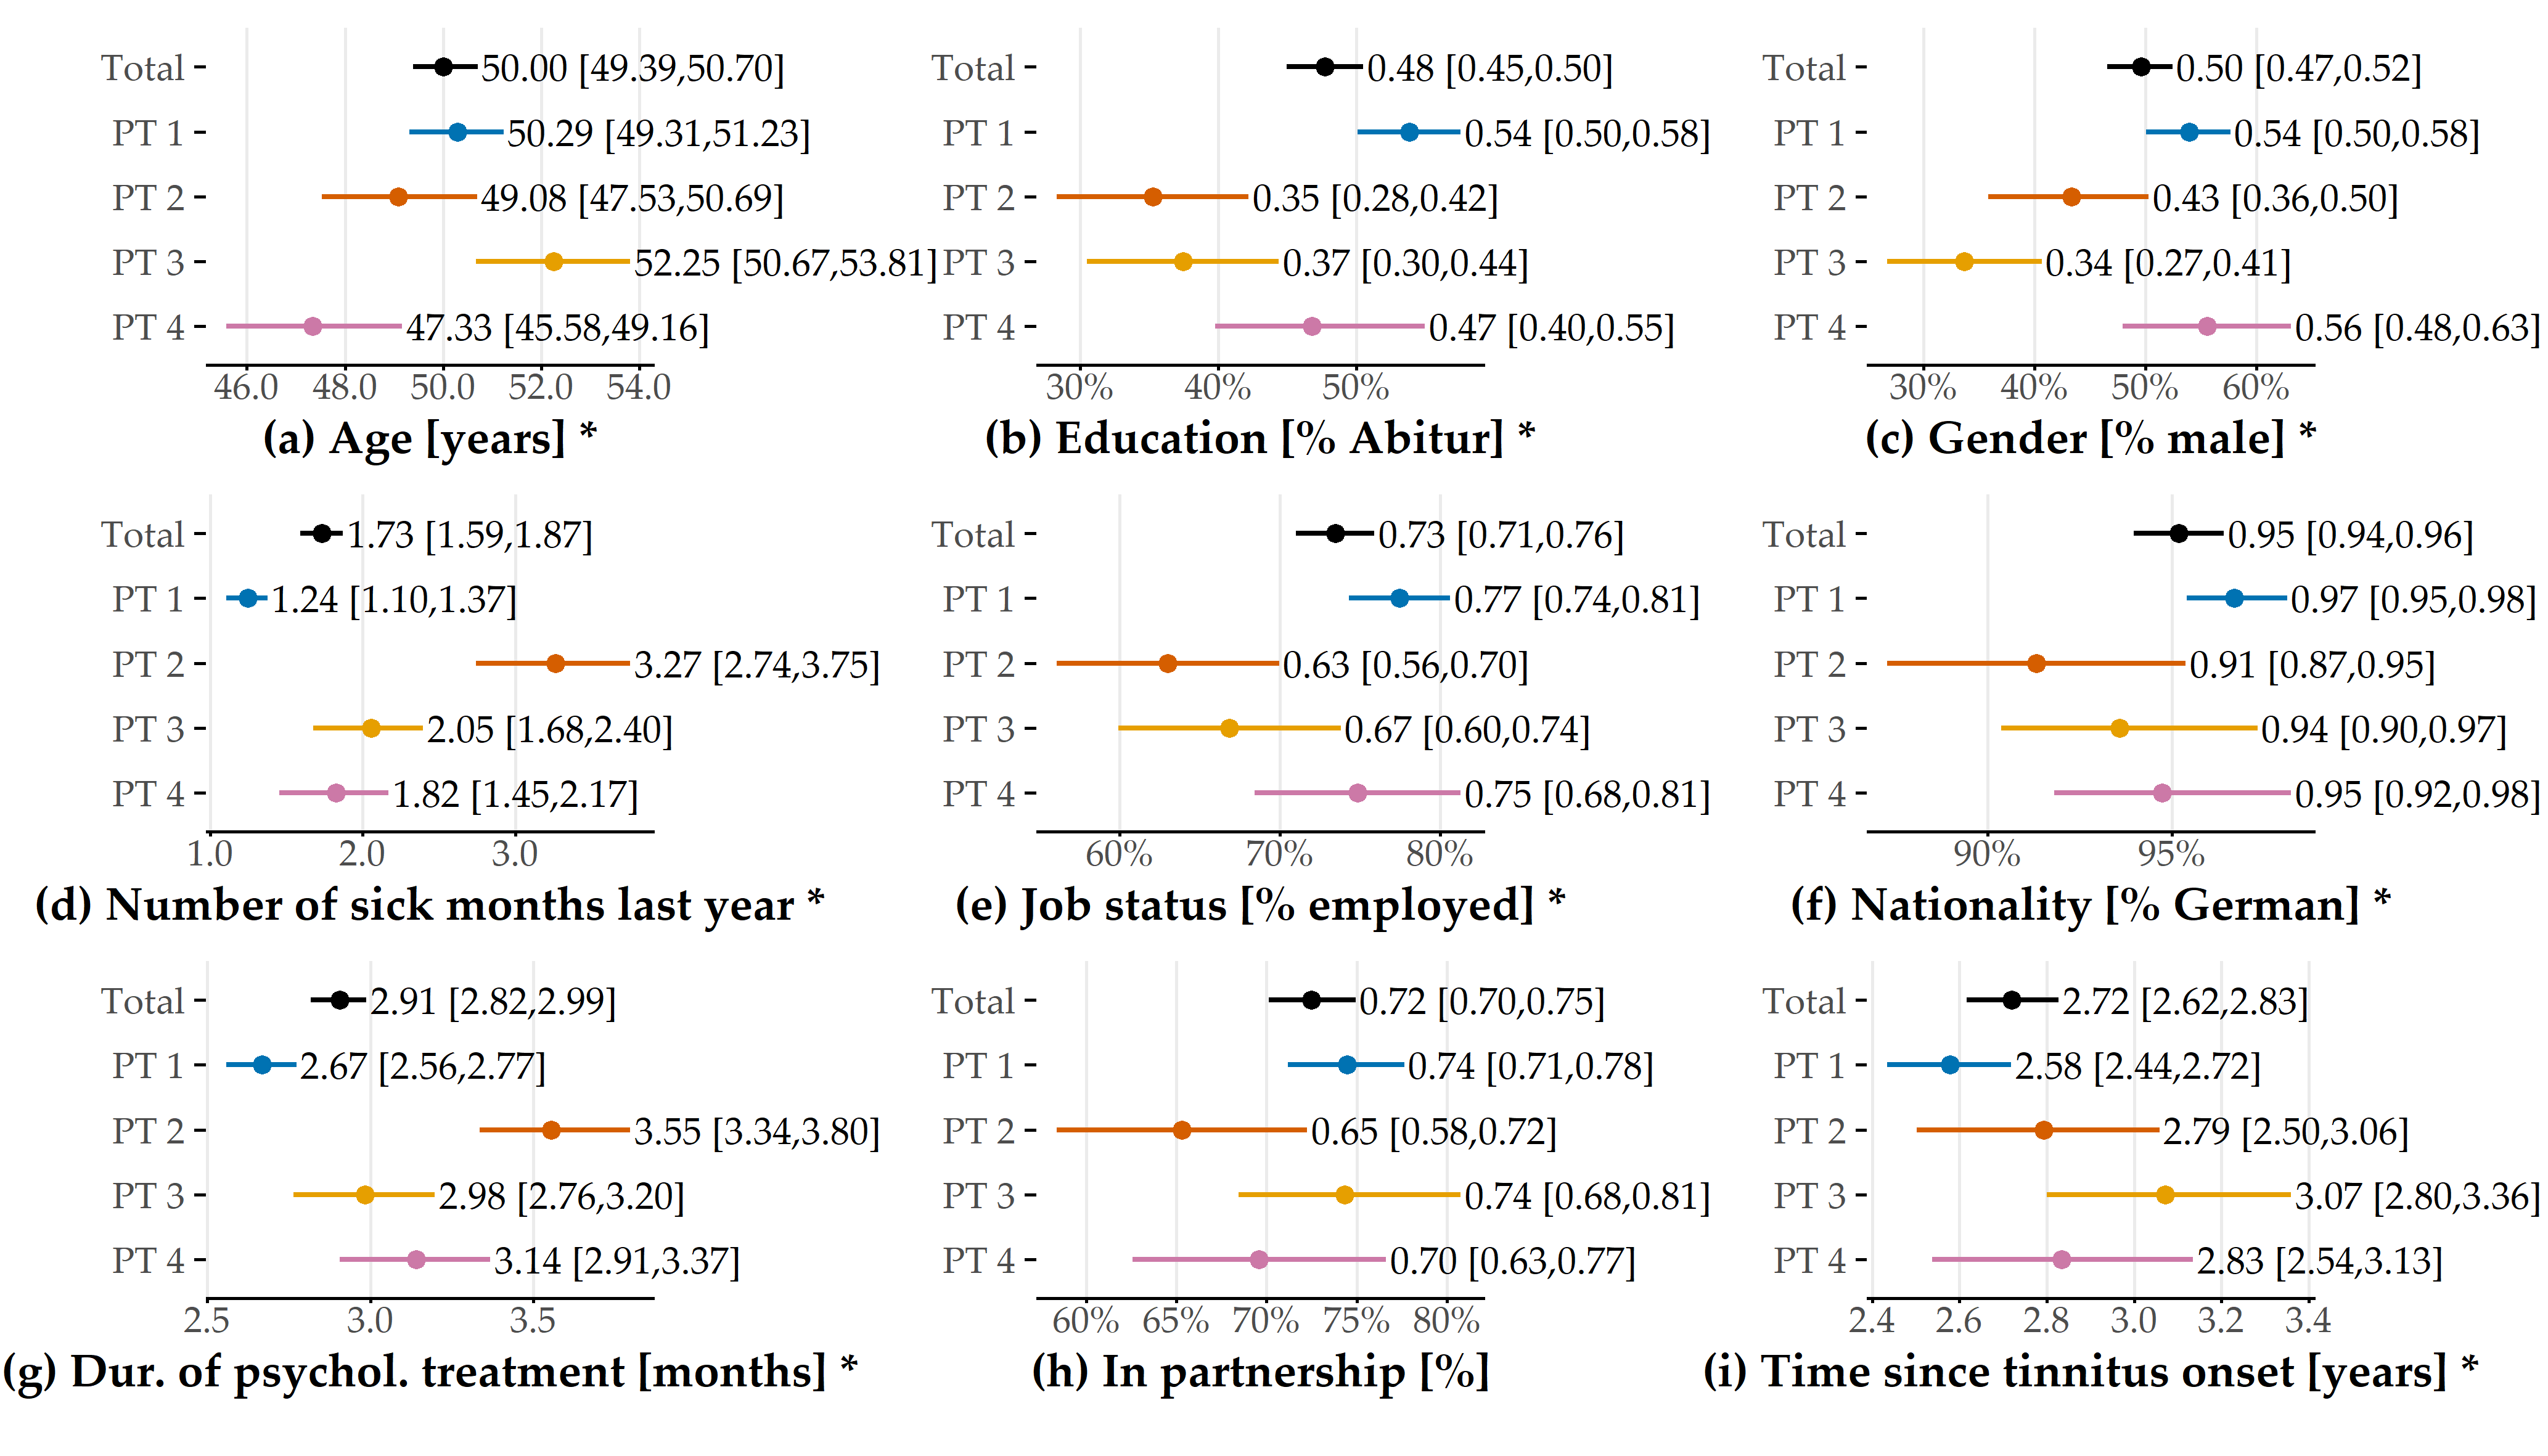 Inter-phenotype comparison of demographic characteristics. Summaries are given as mean [95% confidence interval] for the entire population and each of the four phenotype subpopulations. Confidence intervals were estimated using nonparametric Basic Bootstrap Sampling [165] with 2000 samples each. The Kruskal-Wallis test was used to compare differences between phenotypes for continuous features (such as age), and Pearson’s chi-square test was used for categorical features (such as gender). An asterisk indicates statistical significance (\(\alpha\) = 0.05). Correction for multiple comparisons was not performed due our approach’s exploratory nature. The figure is adapted from [163].